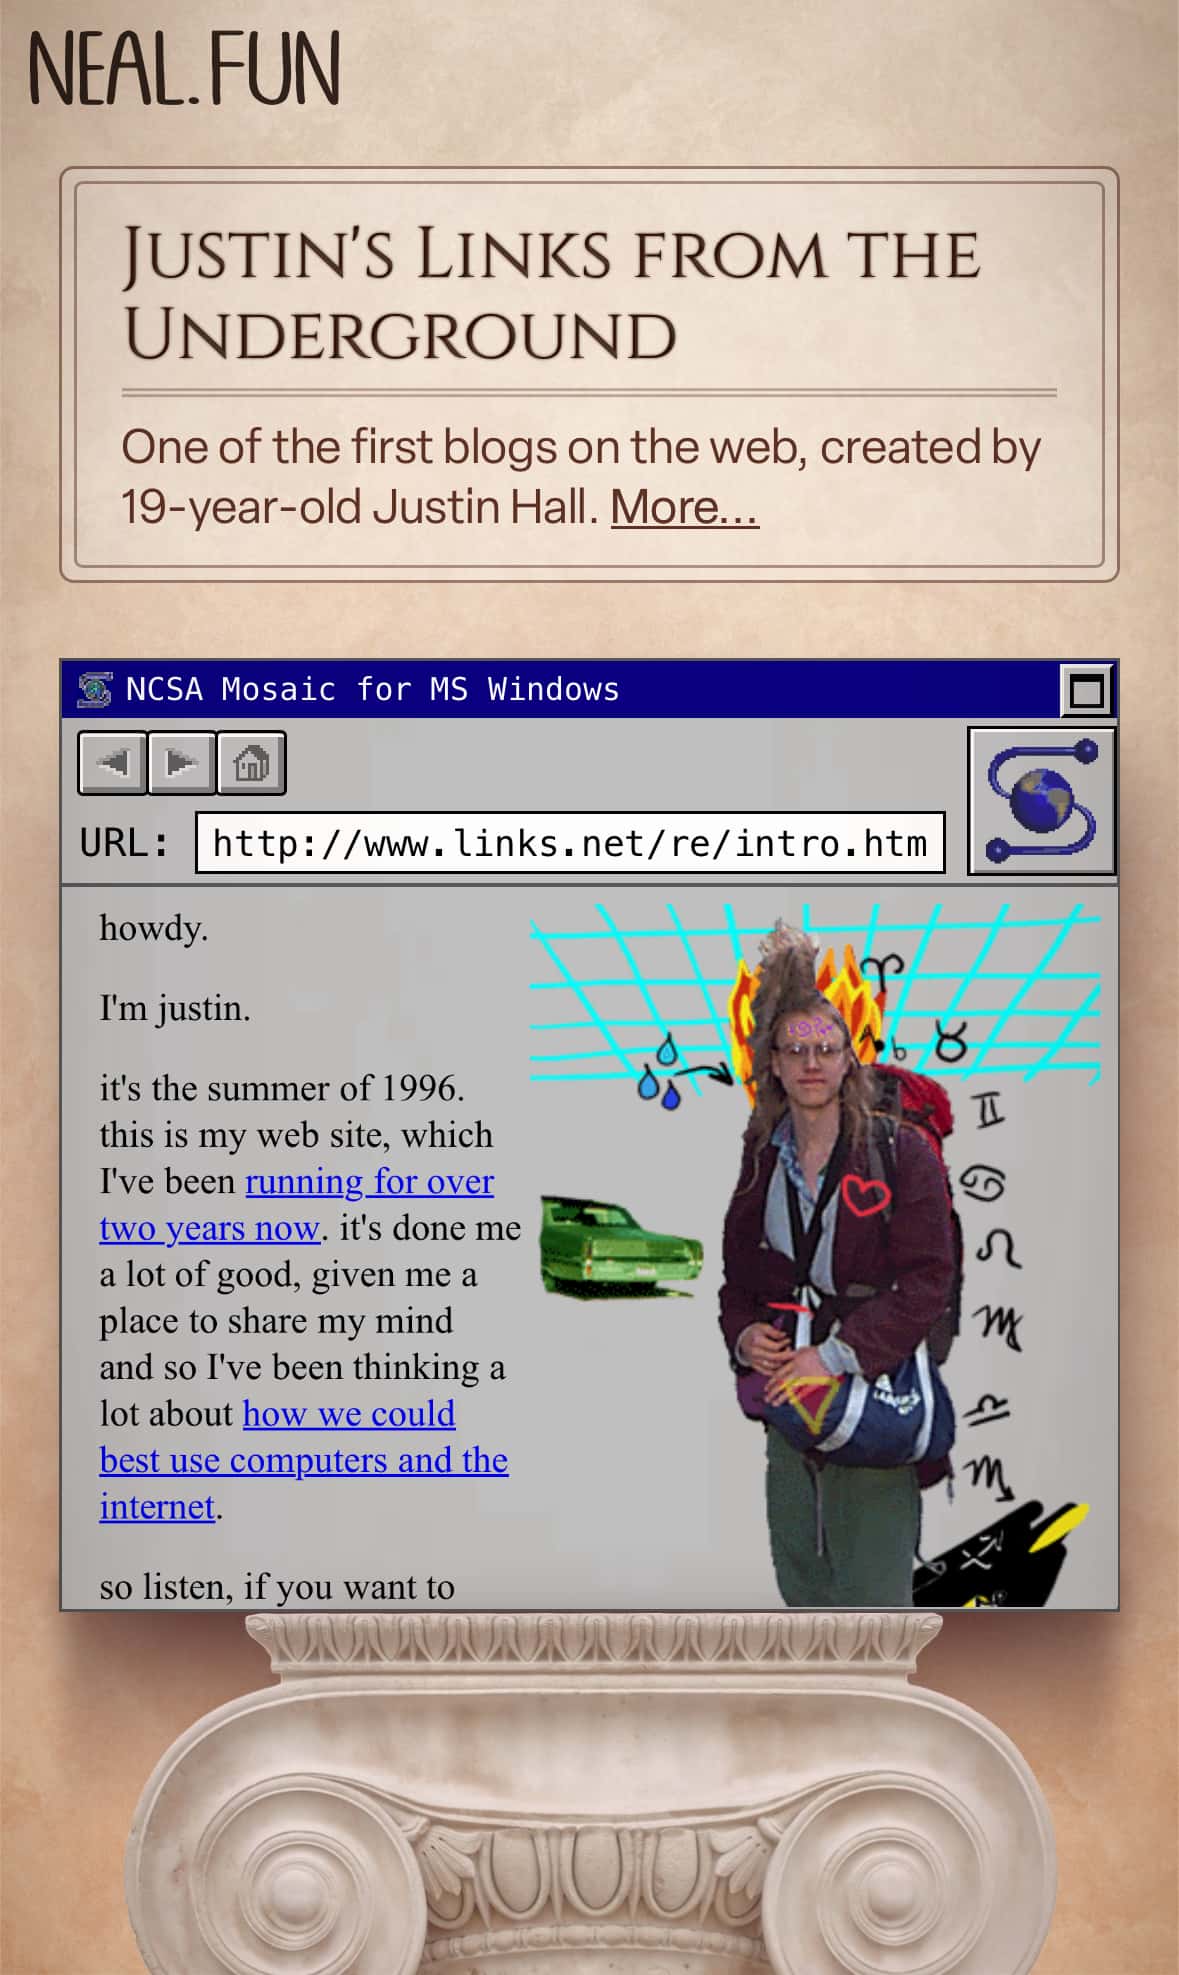 On a Roman pedestal, a screenshot of the website links.net from 1996 rests. links.net looks like a typical site from that era, set in a black serif on a gray background. There’s a collage of the website owner. The exhibition label says: one of the first blogs on the web, created by 19-year-old Justin Hall.